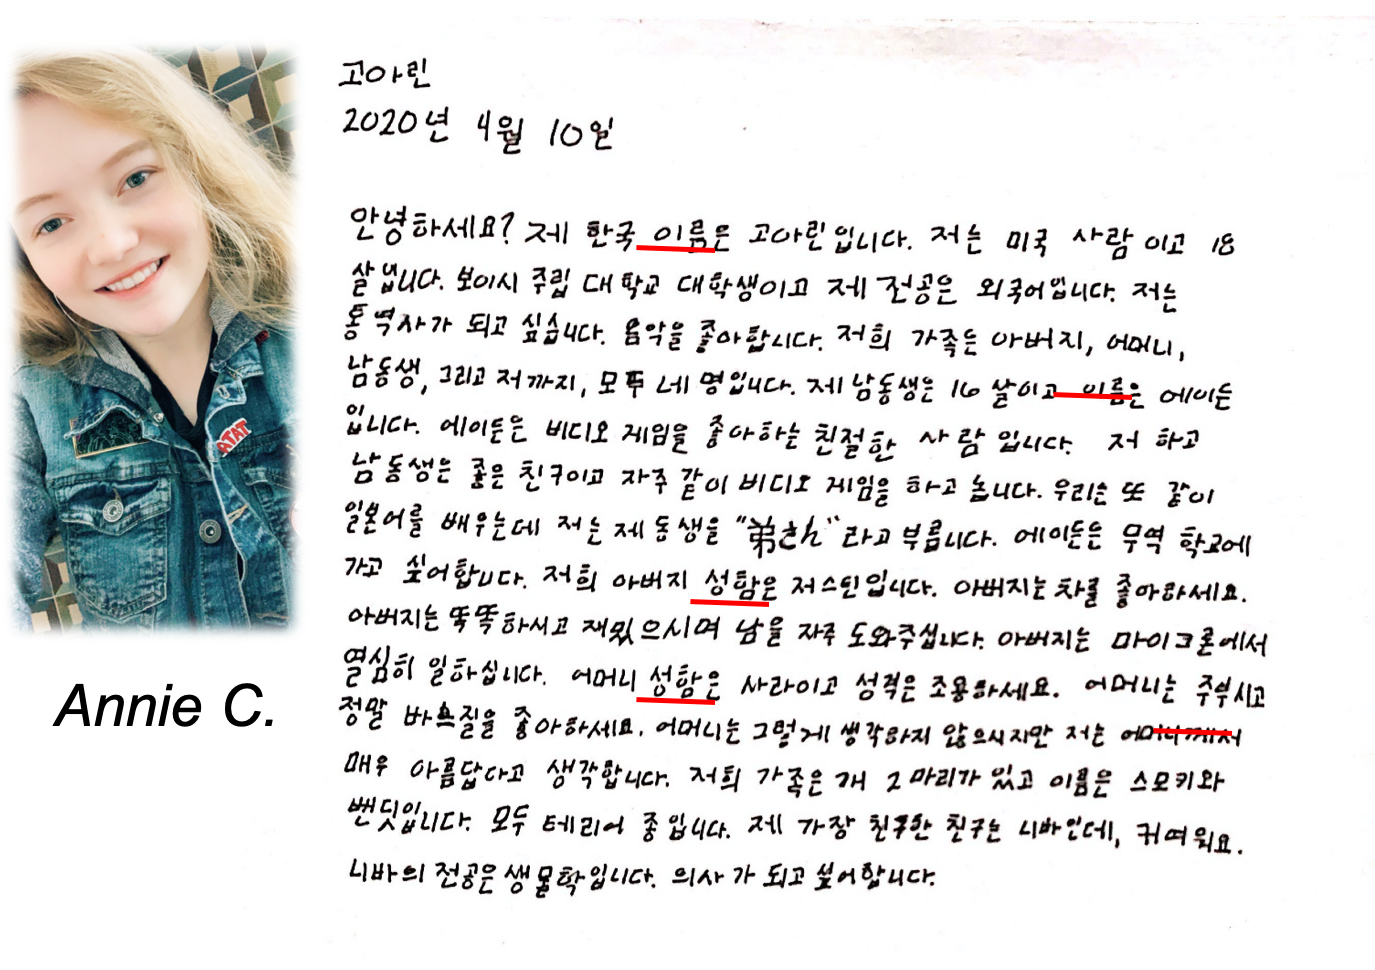 Examples of Korean texts using honorifics, along with pictures of text author Annie C.